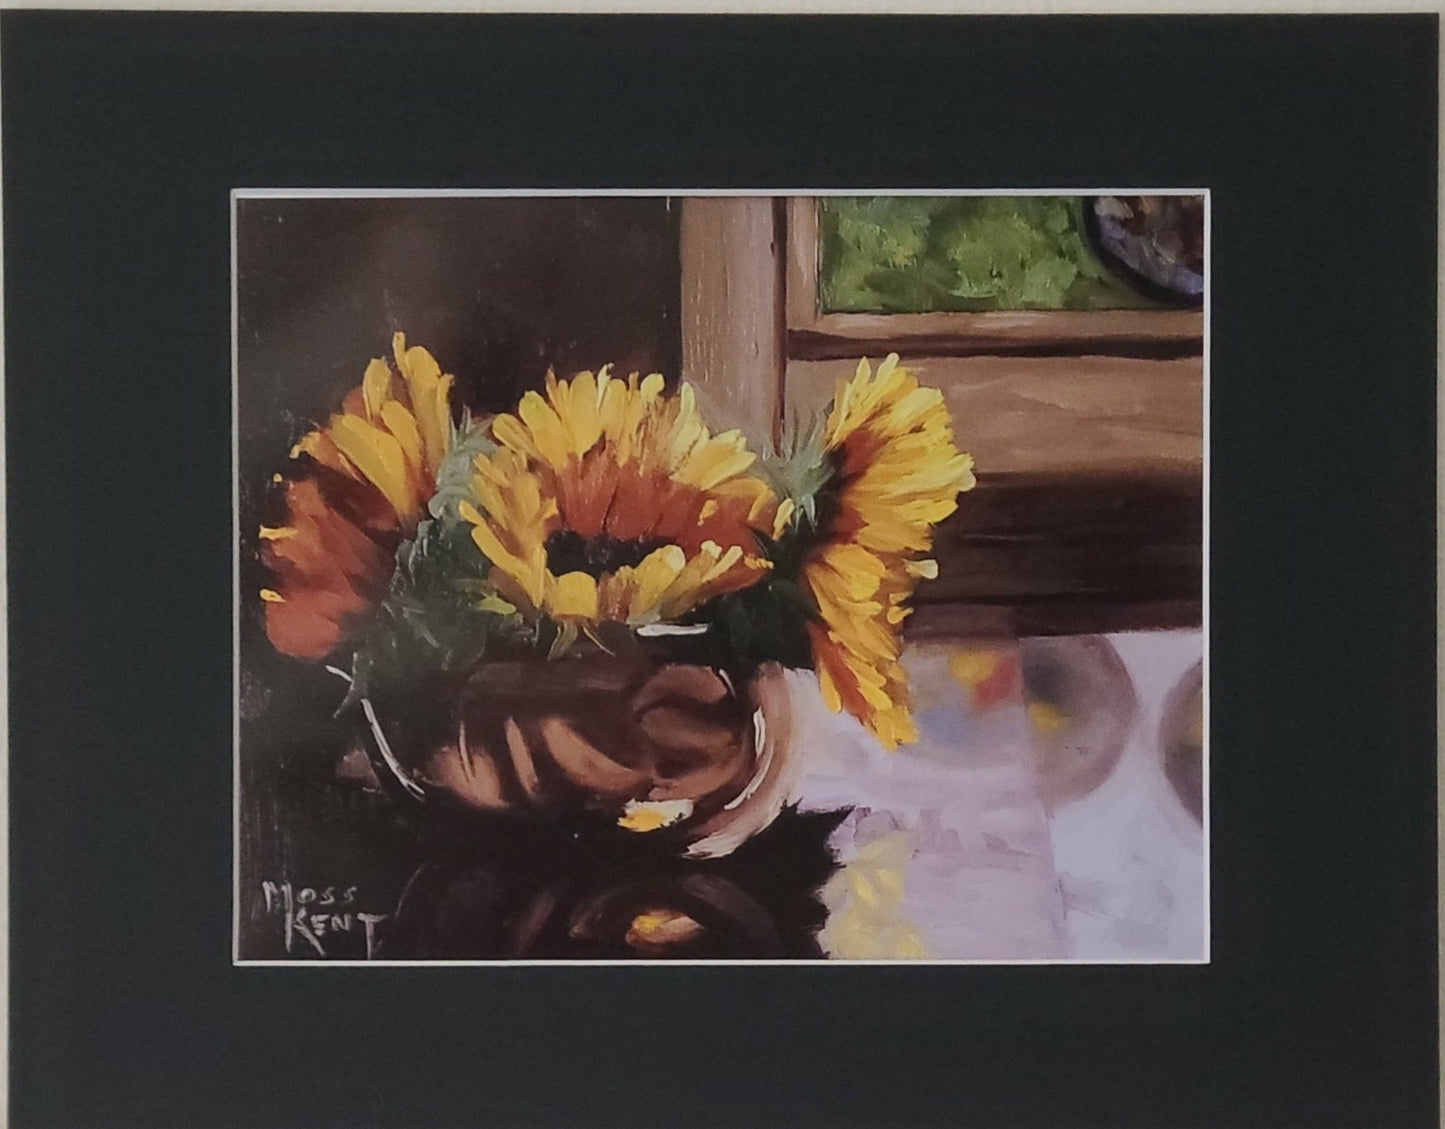 " Sunflowers In The Window " Matted Print